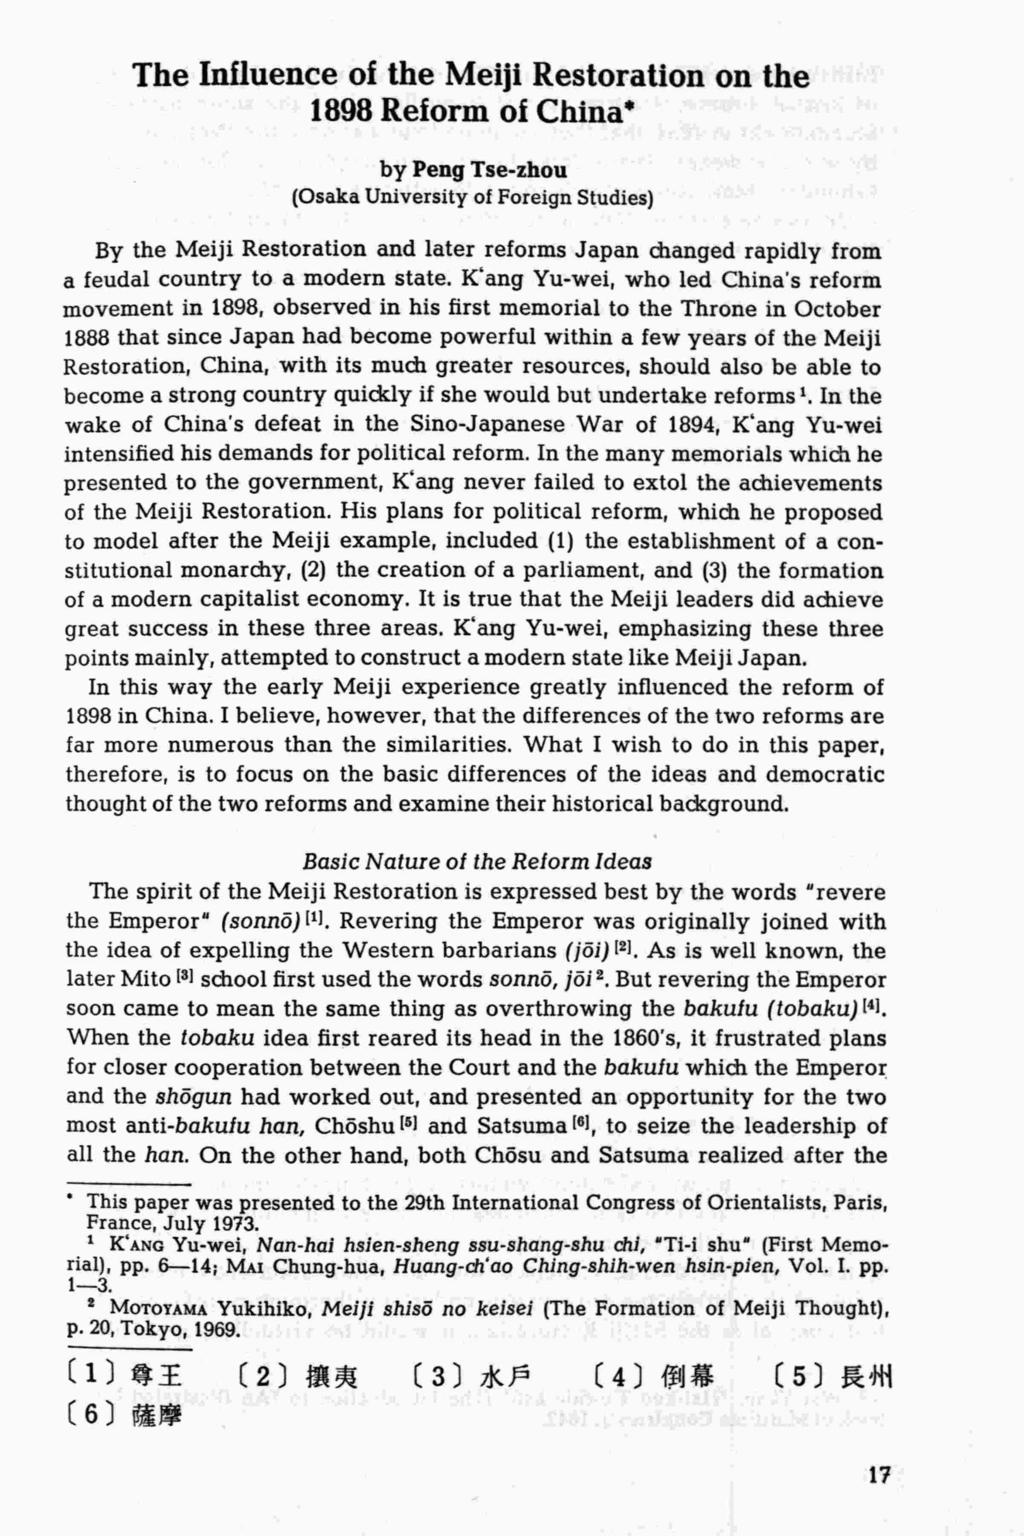 The lnßuence of the Meiji Restoralion on the 1898 Reform of China by Peng Tse-zhou (Osaka University of Foreign Studies) By the Meiji Restoration and later reforms Japan changed rapidly from a feudal